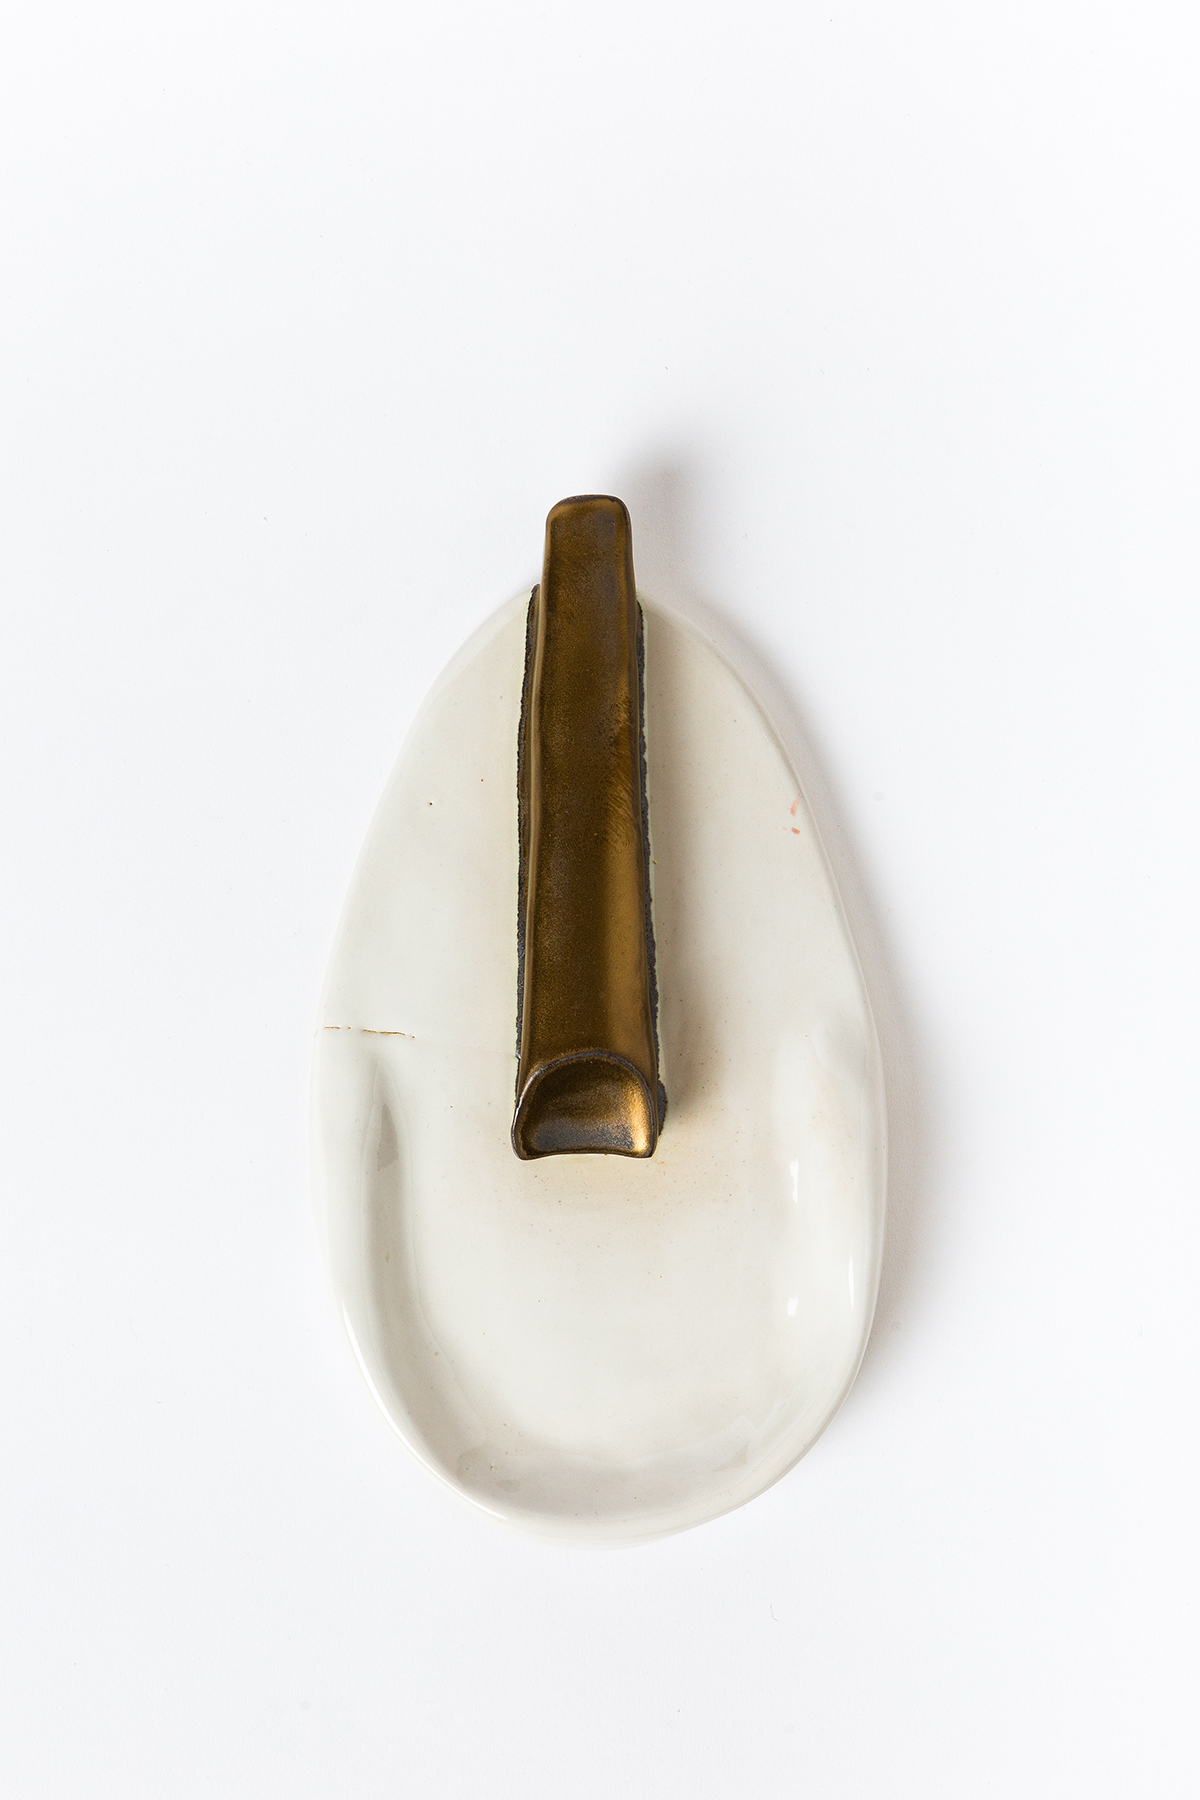 A white petal with a bronze stick in the middle of it